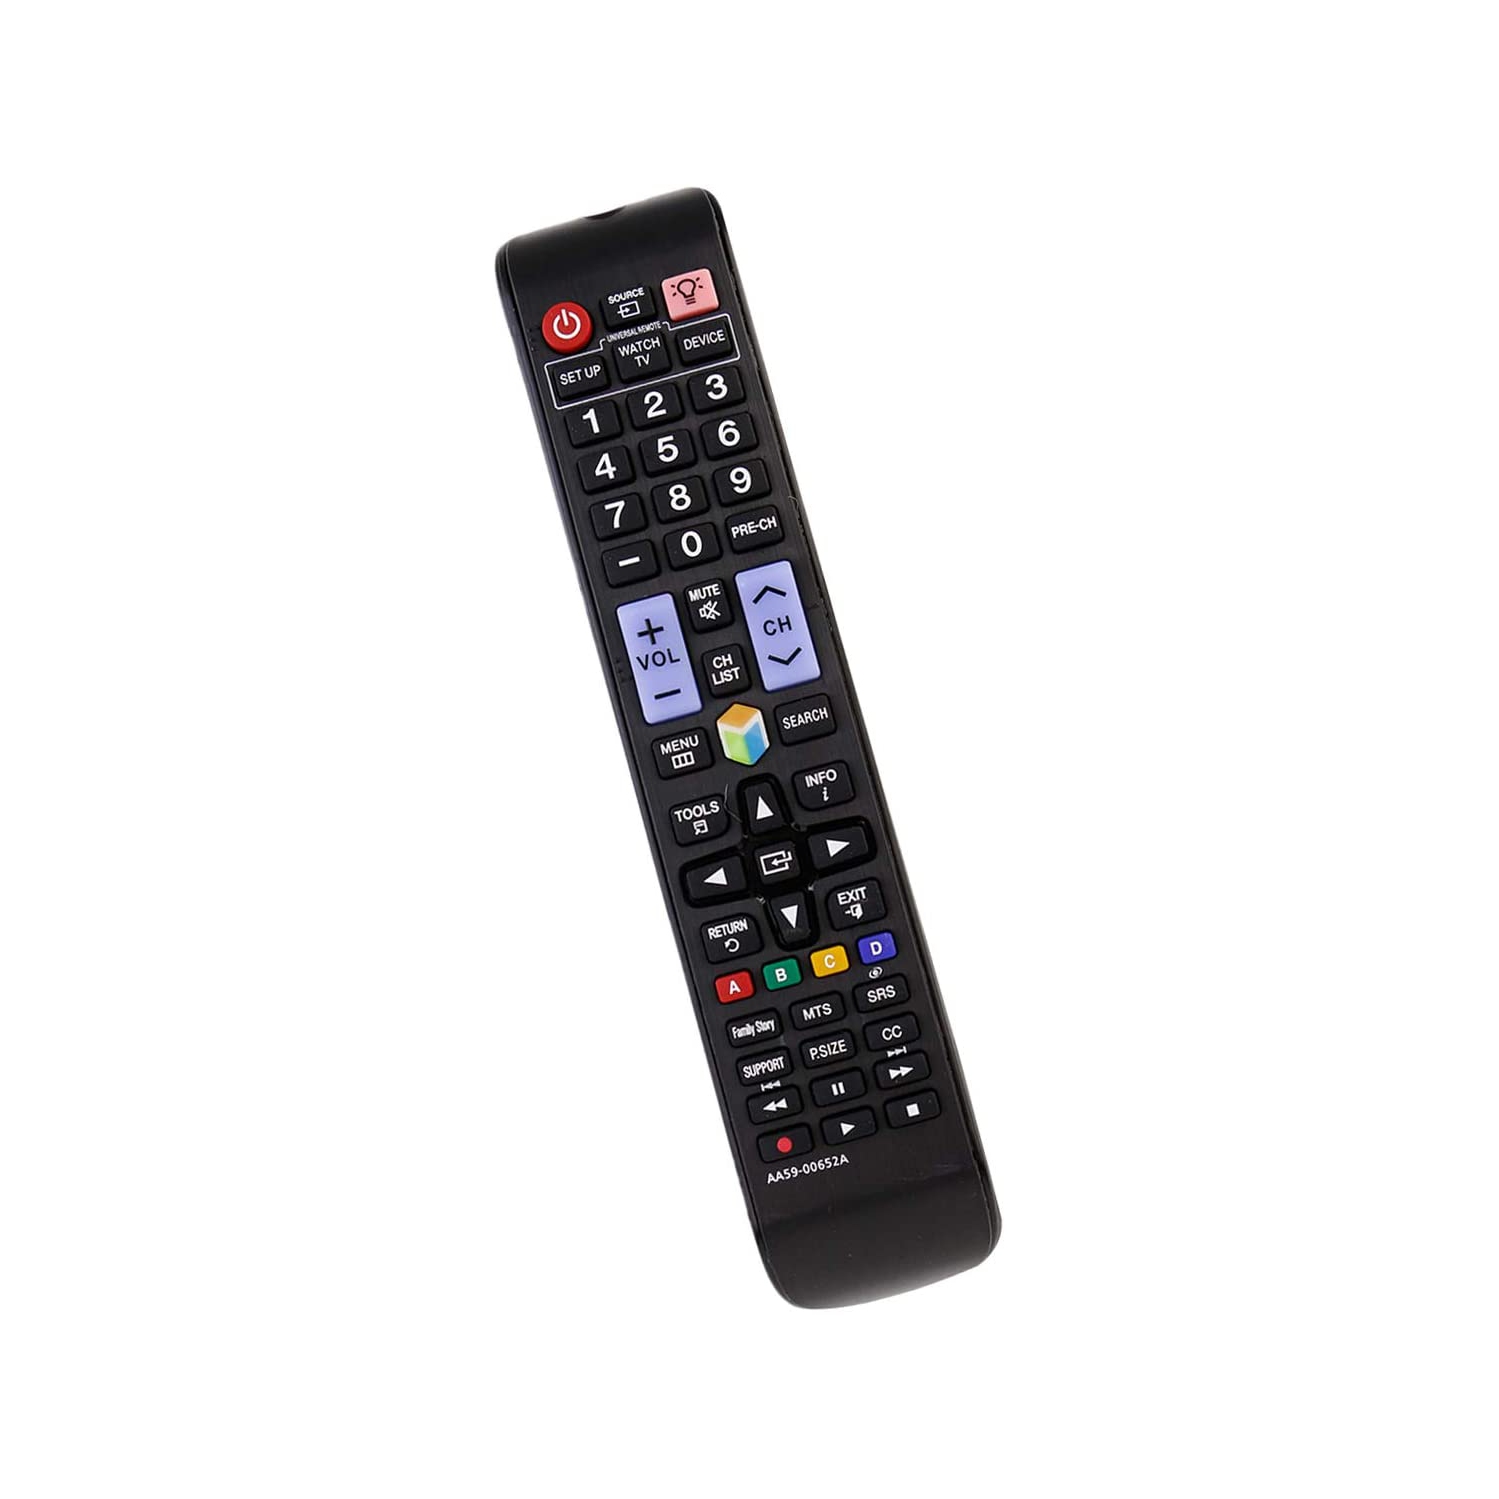 New AA59-00652A Replacement Remote Control fit for Samsung TV UN40ES6100F UN40ES6100FXZC UN46ES6100F UN46ES6100FXZC